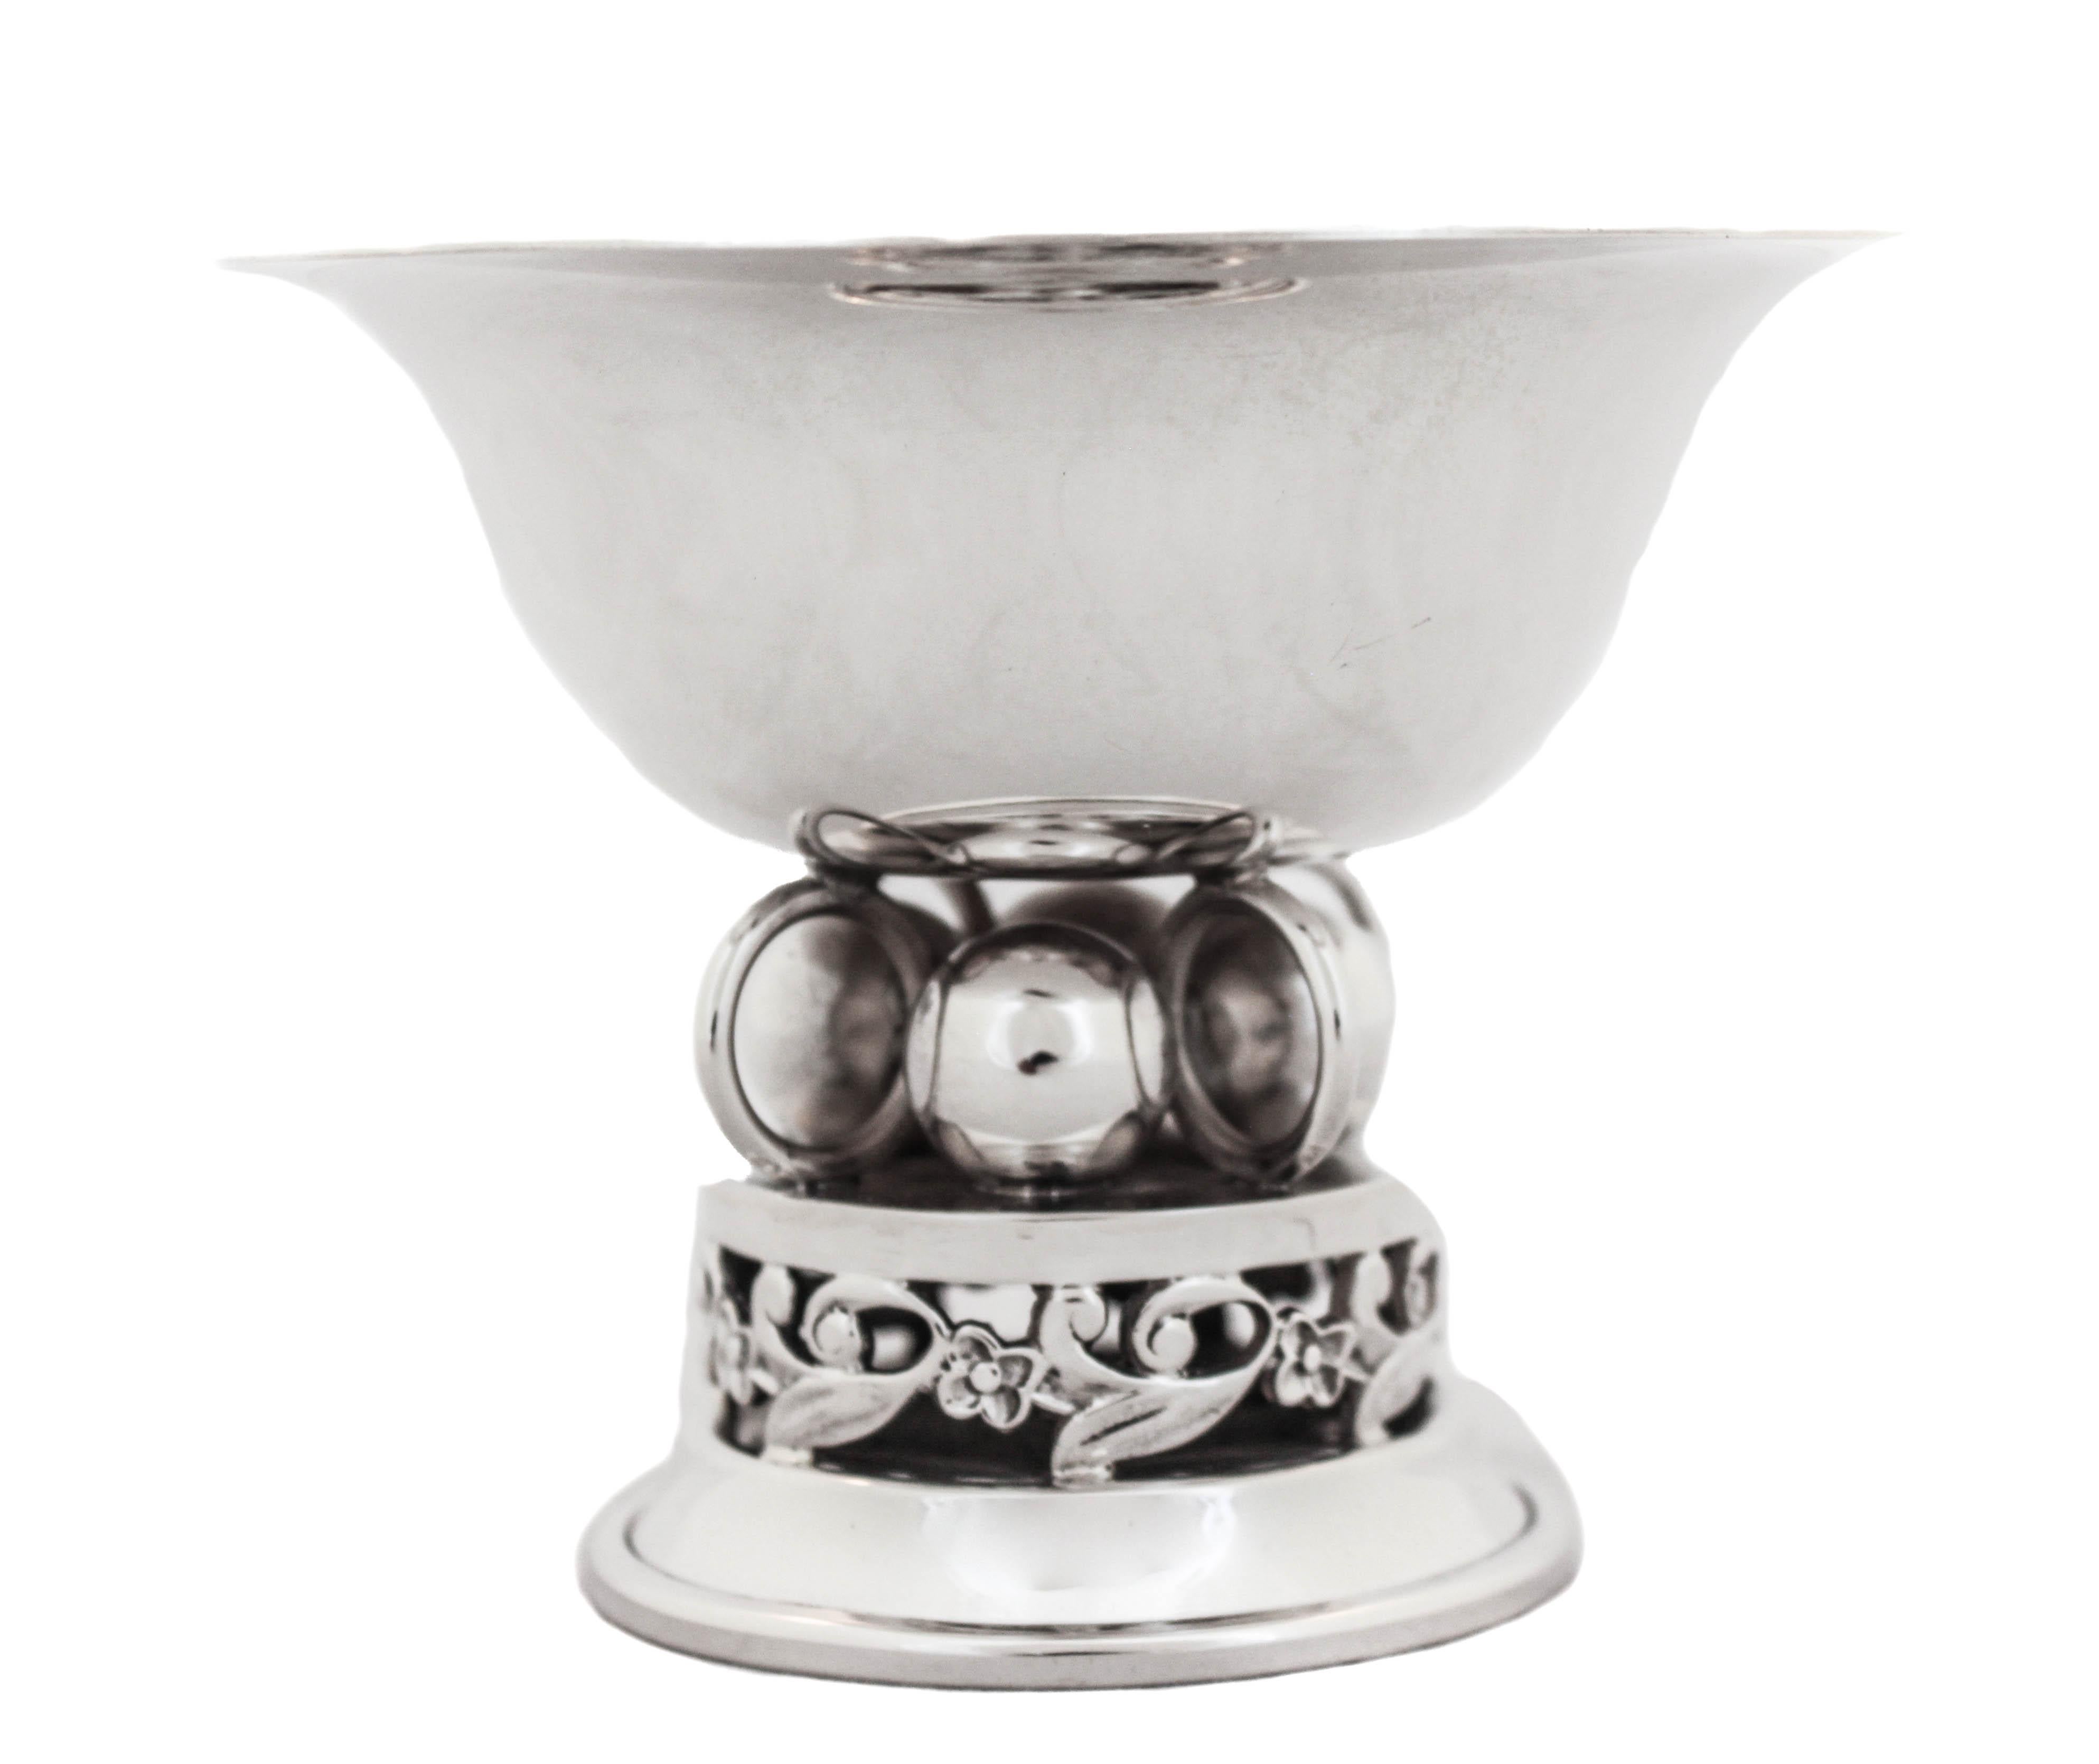 These sterling silver compotes have a Jensenesque appearance without the painful price!! Four marble size balls are between the bowl and base. The base is NOT weighted and has an Art Deco design. A great look for an amazing price!!!